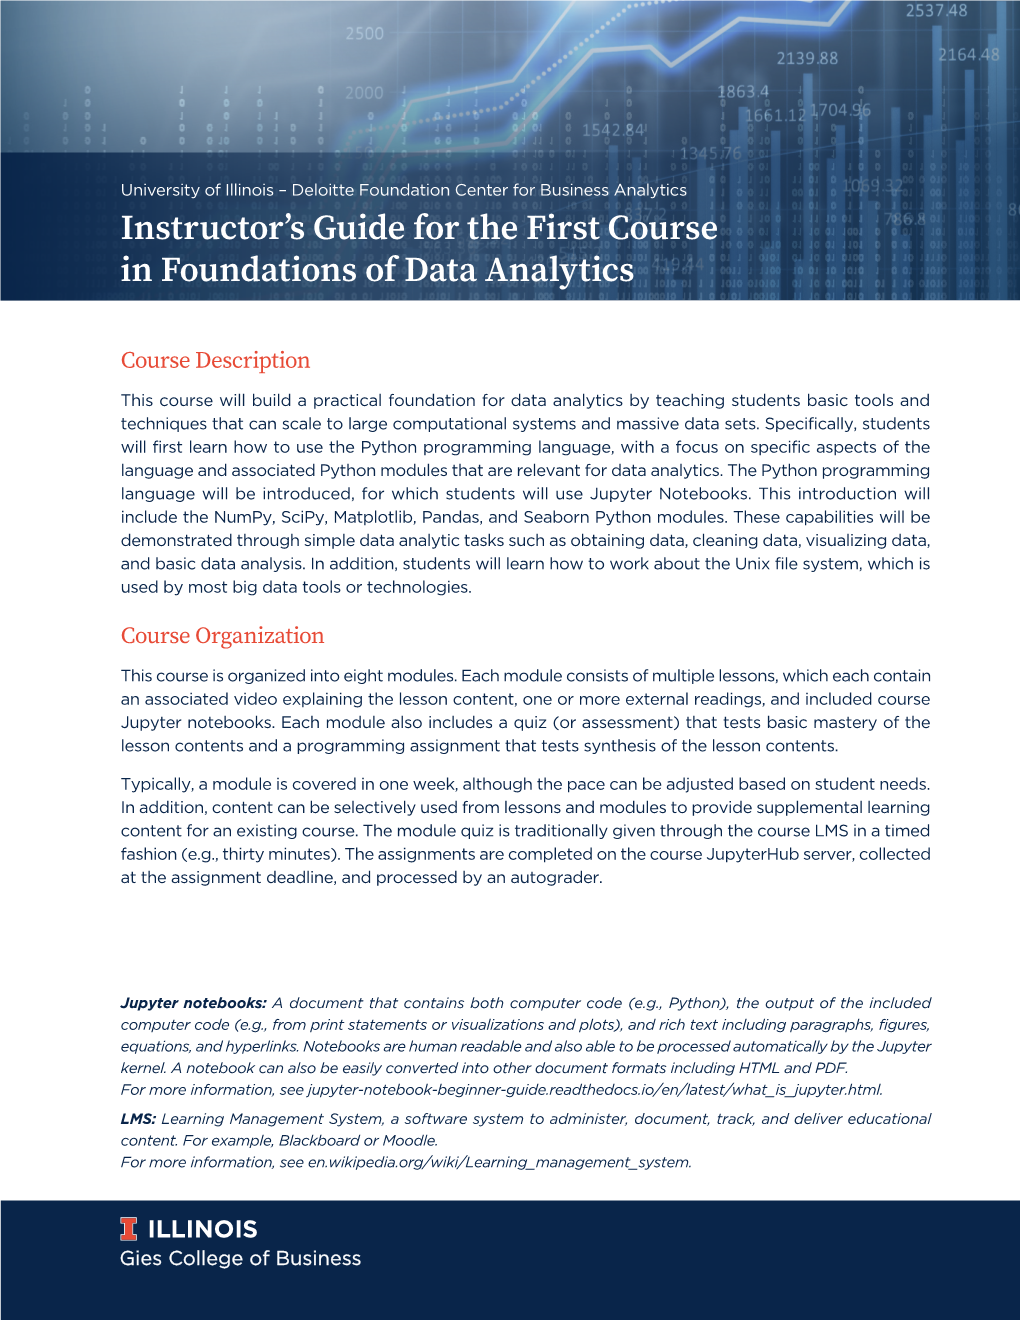 Instructor's Guide for the First Course in Foundations of Data Analytics